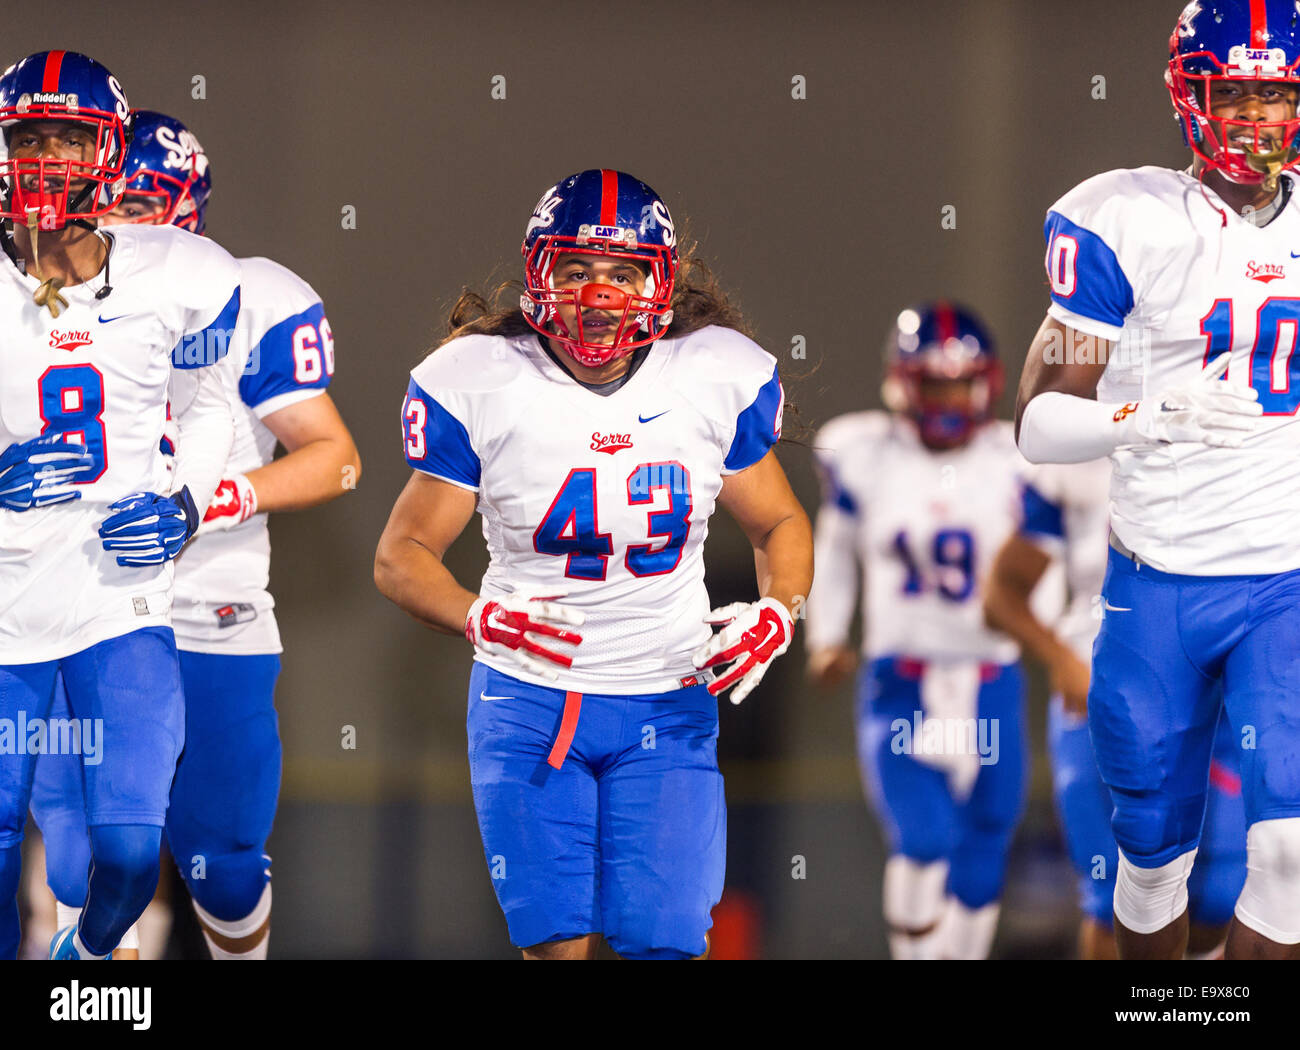 October 4, 2014, La Puente, CA.Gardena Serra cavaliers linebacker (43) Sam Wendt in action during the Bishop Amat upset of the Cavaliers at Bishop Amat high school on October 3, 2014. The Cavaliers who are usually a nationally ranked high school football team, were upset by Bishop Amat 14 - 7. (Mandatory Credit: Ed Ruvalcaba/MarinMedia.org) (Complete photographer, and company credit required) Stock Photo